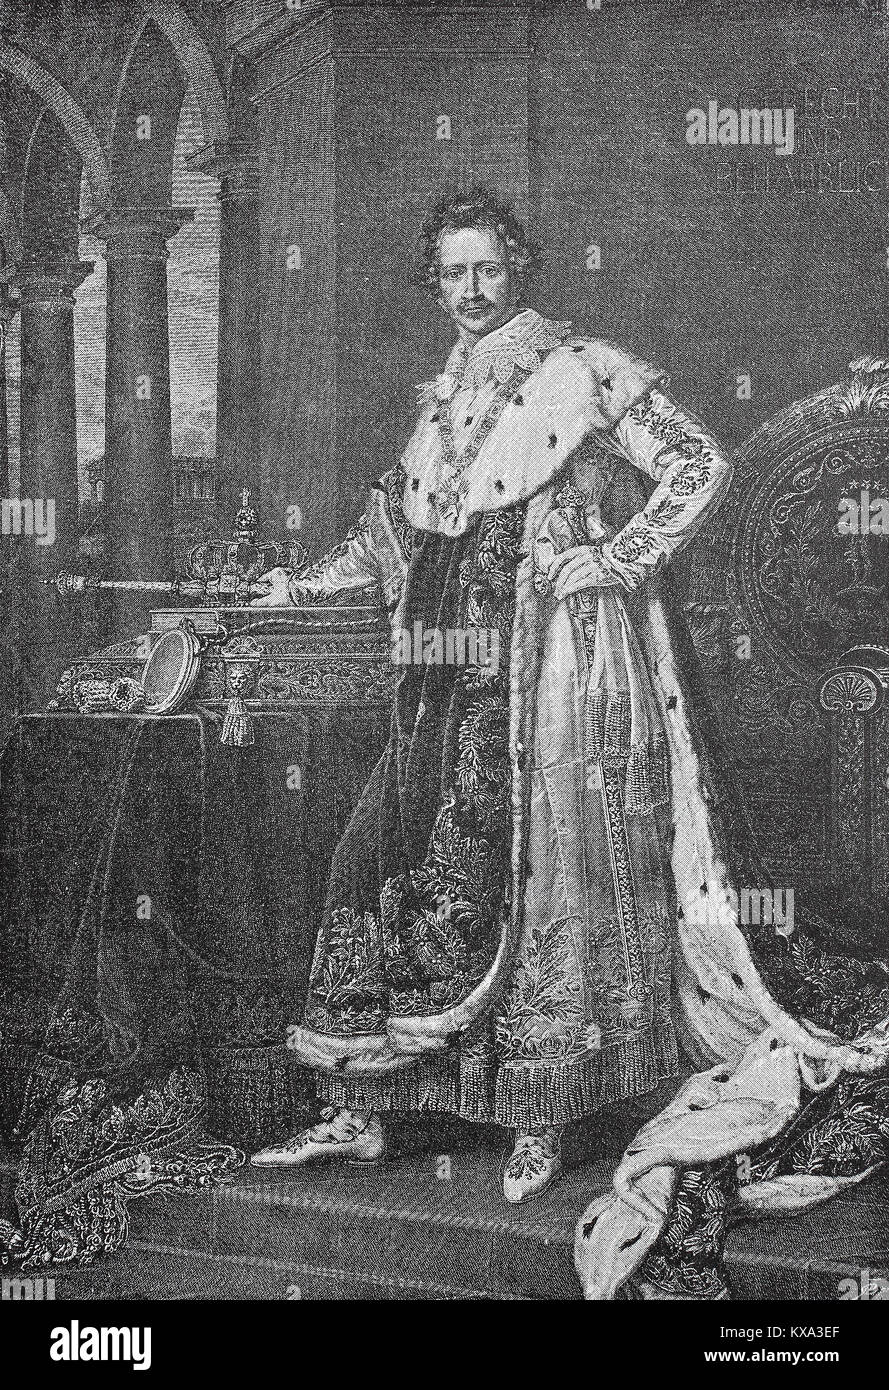 Ludwig I,  25 August 1786 - 29 February 1868, was king of Bavaria from 1825 until the 1848 revolutions in the German states, painting by Joseph Karl Stieler, 1826, depiction in the coronation robe, digital improved reproduction from an original woodcut or illustration from the year 1880 Stock Photo